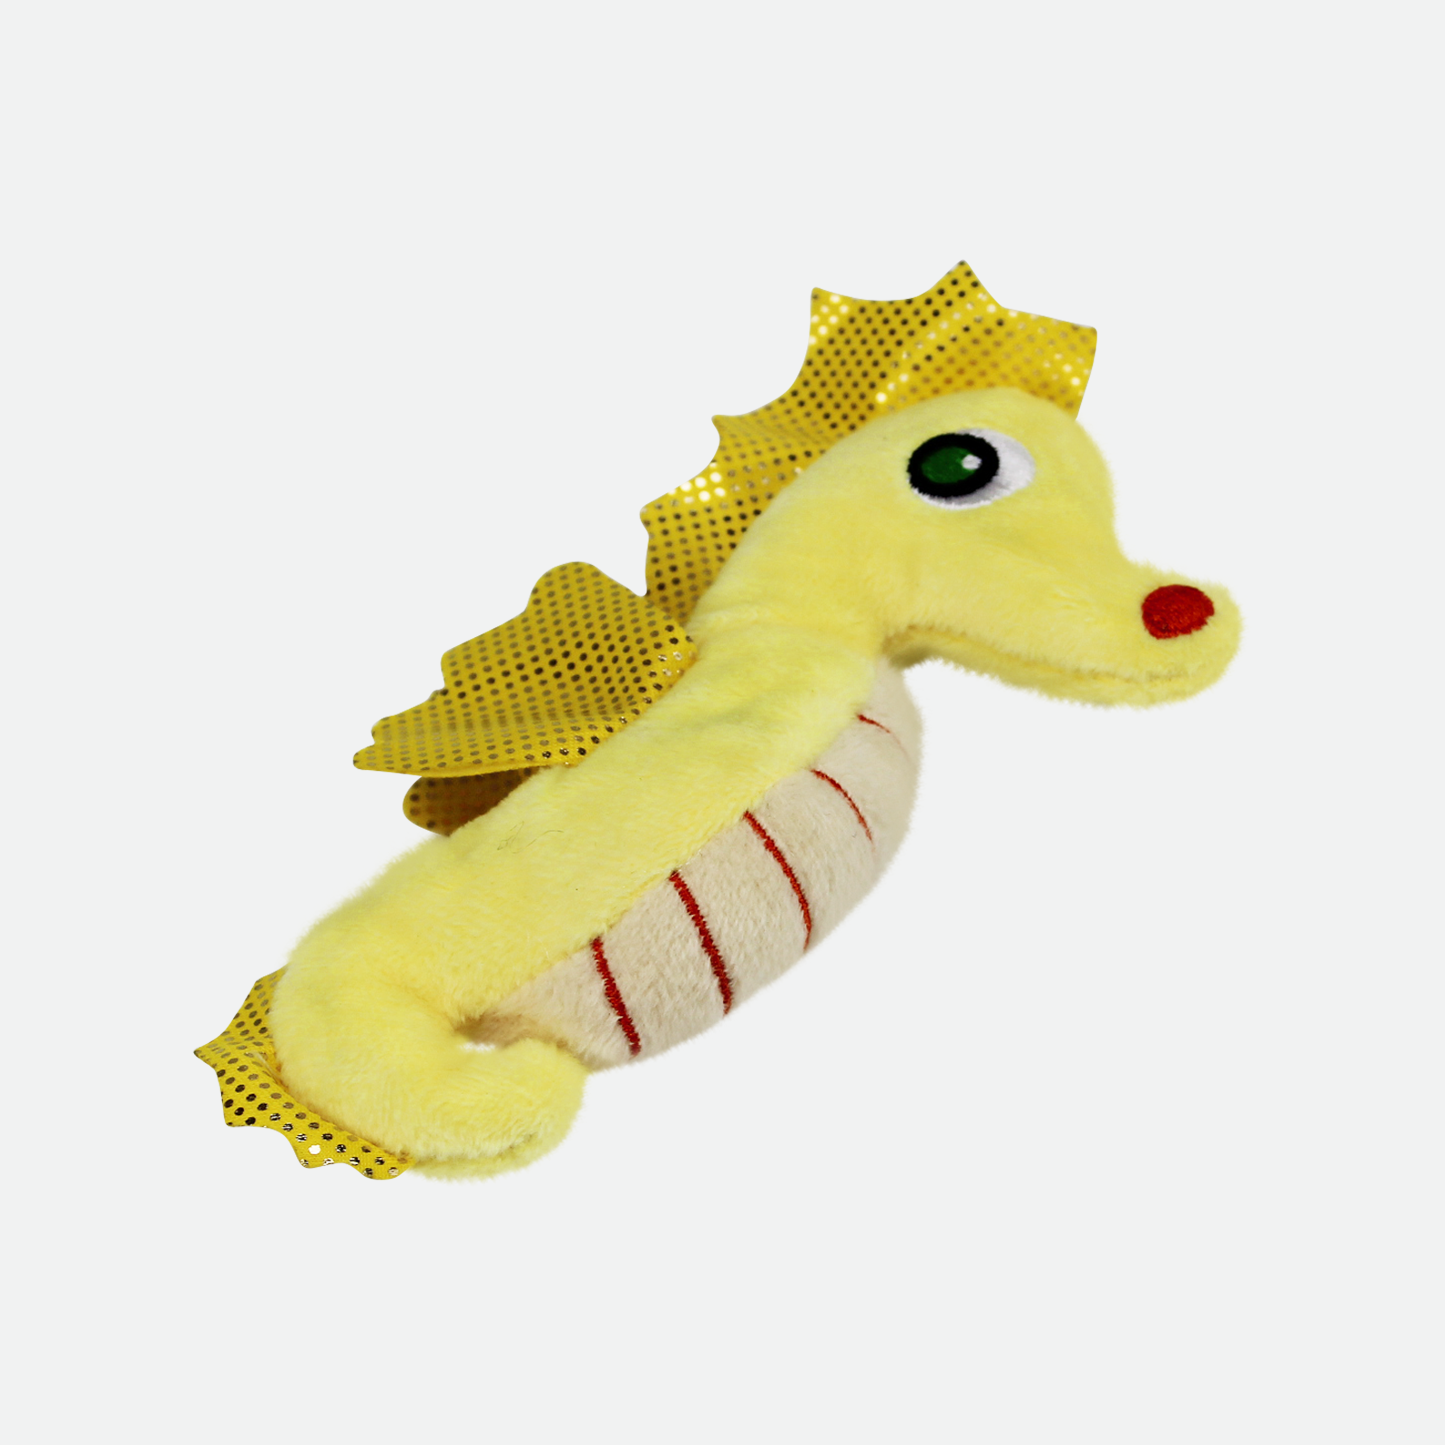 Plush toy for cat, seahorse style